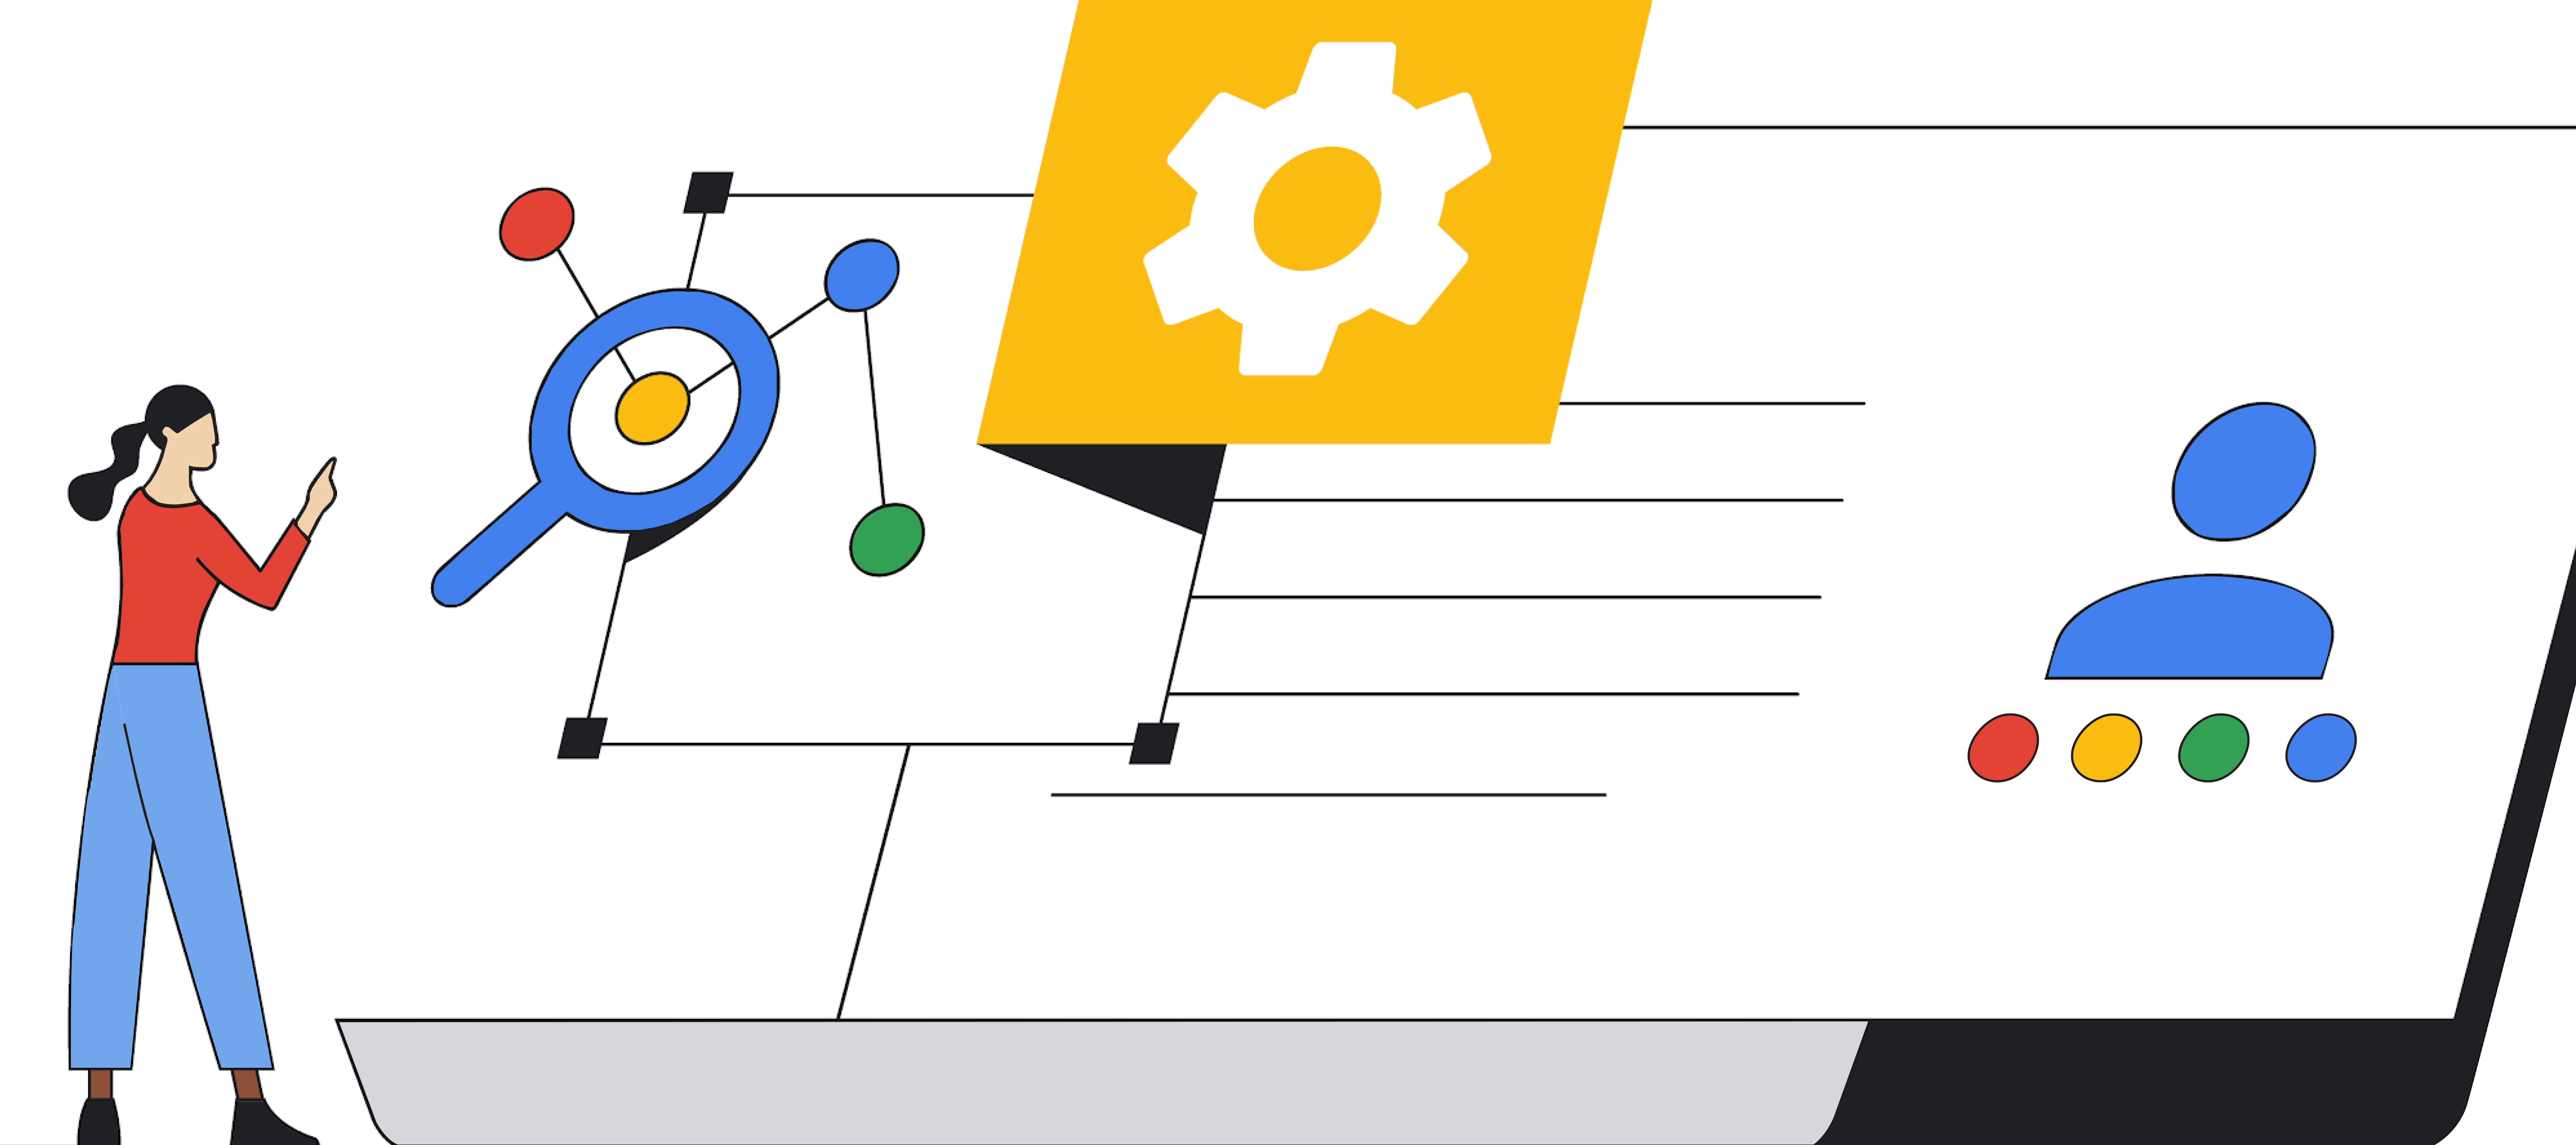 Introducing the Getting Started on Google Cloud Moderators